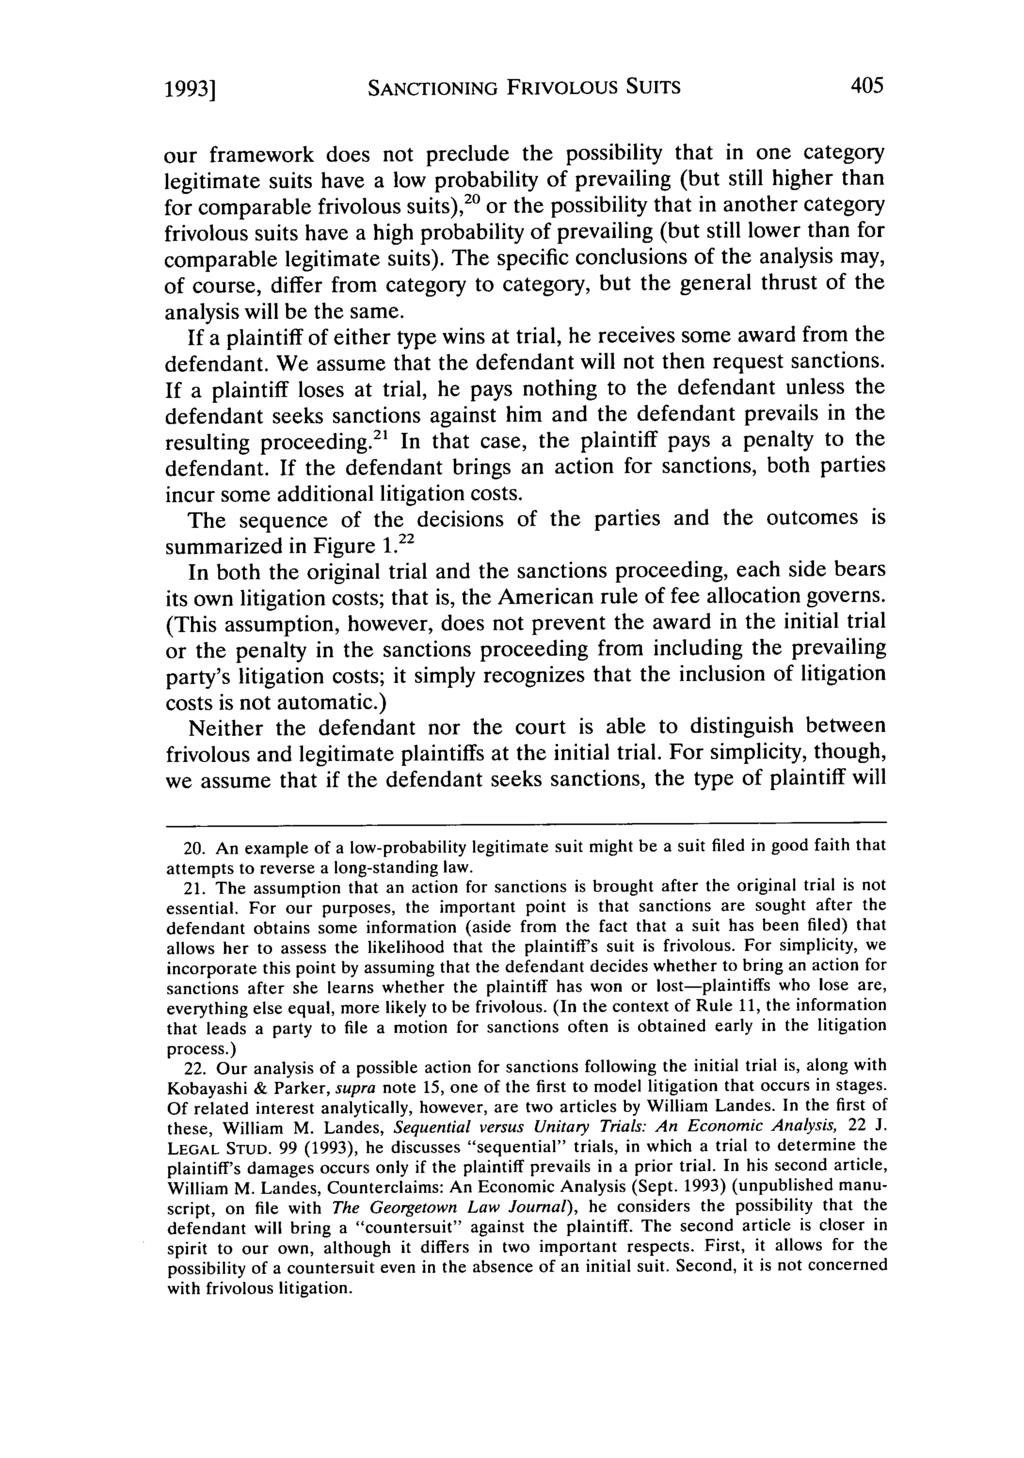 1993] SANCTIONING FRIVOLOUS SUITS our framework does not preclude the possibility that in one category legitimate suits have a low probability of prevailing (but still higher than for comparable